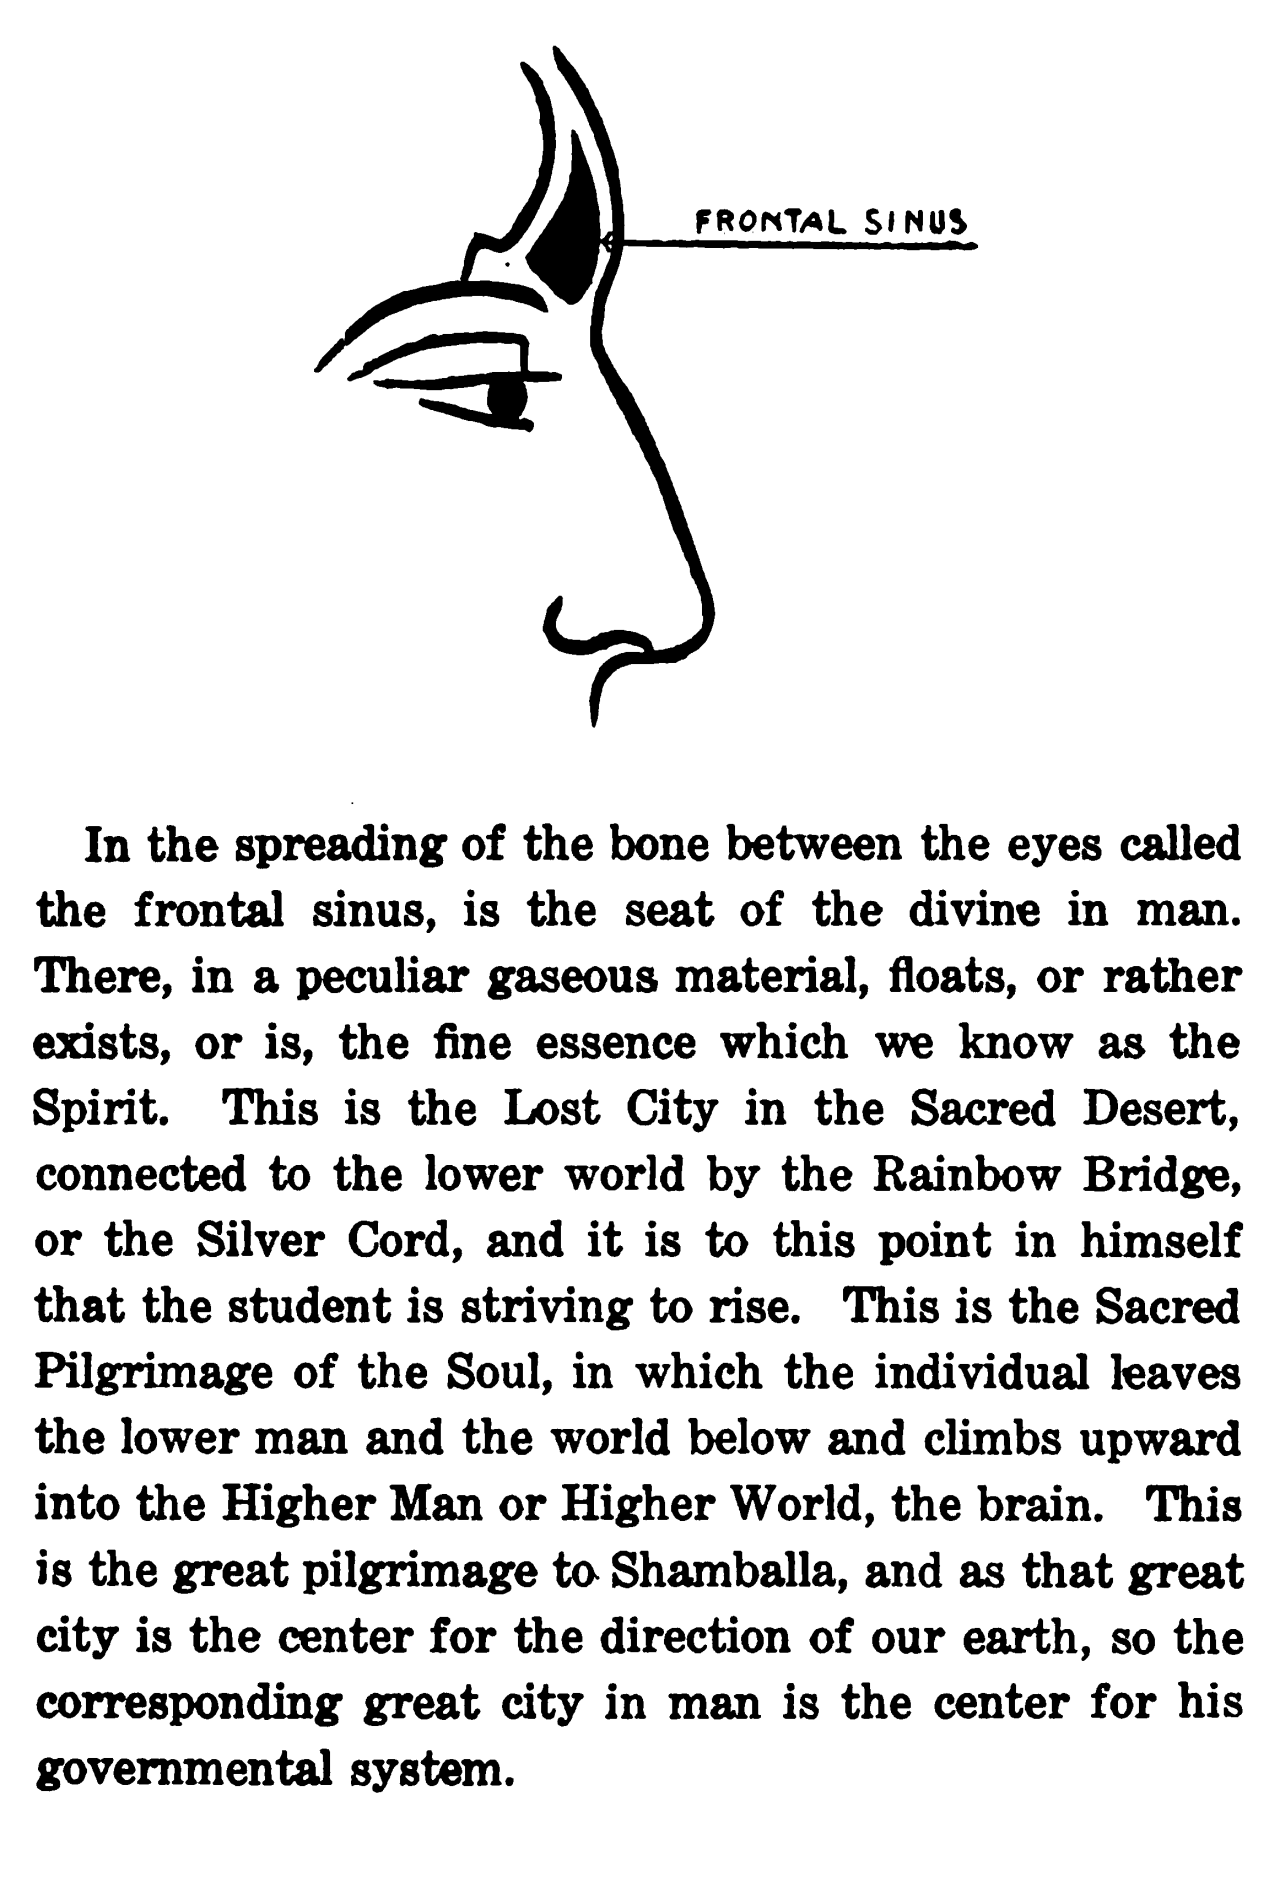 Quote on mind manly hall